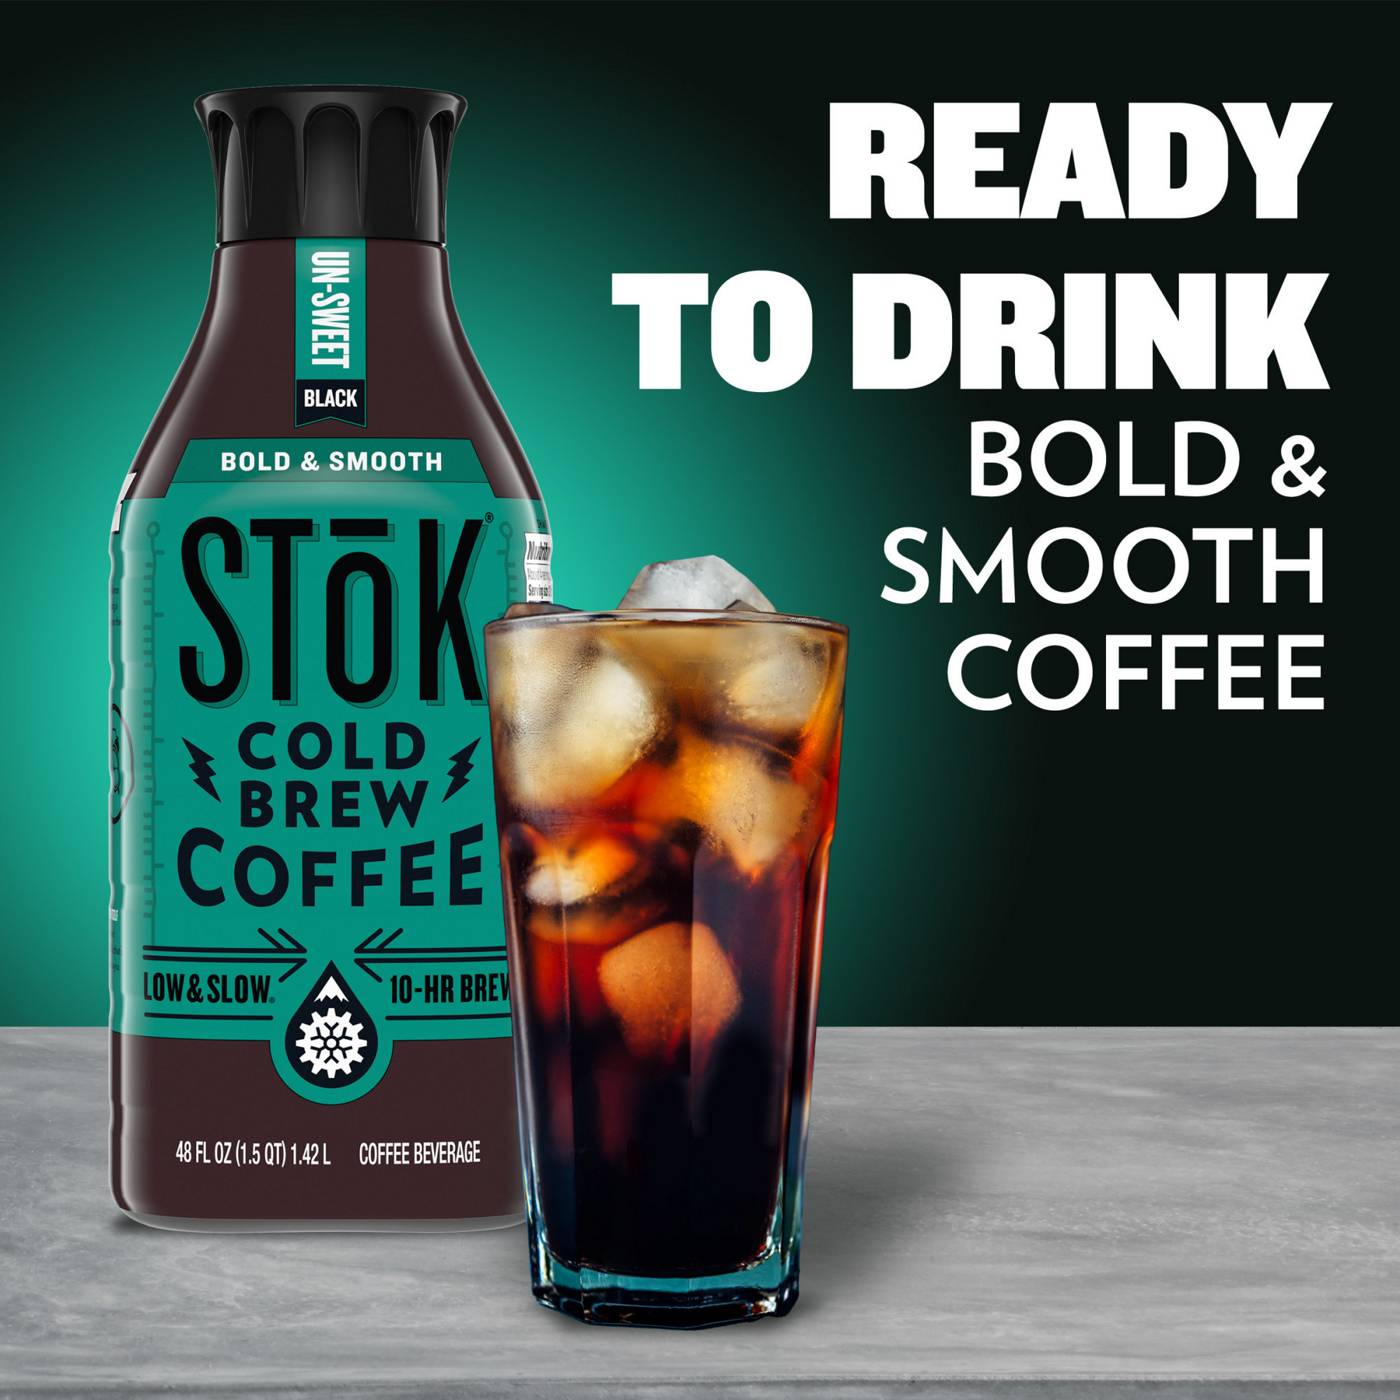 SToK Unsweetened Black Cold Brew Coffee; image 6 of 7